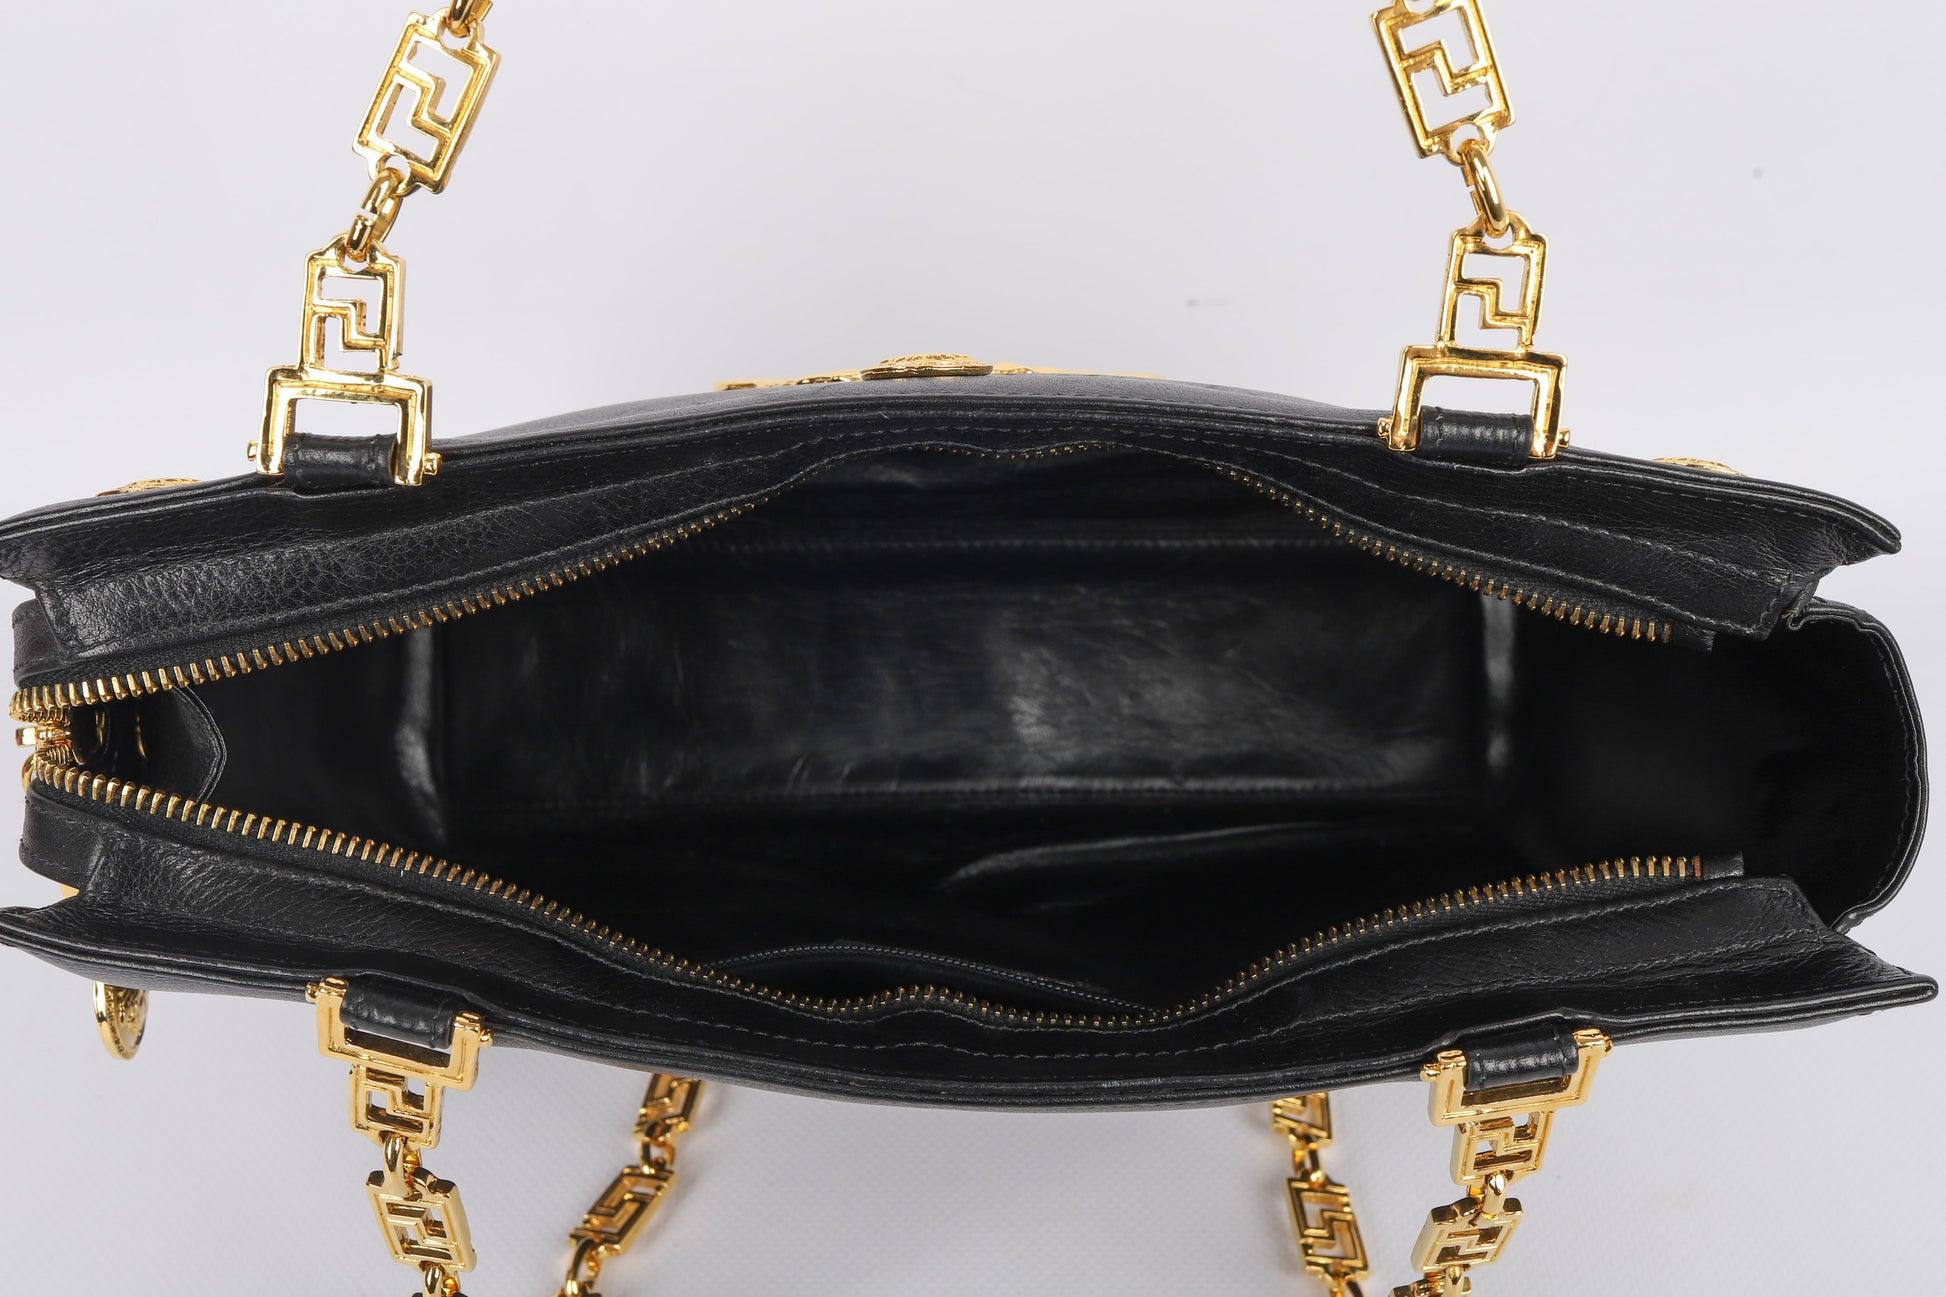 Gianni Versace Black Leather Bag with Golden Metal Elements 3